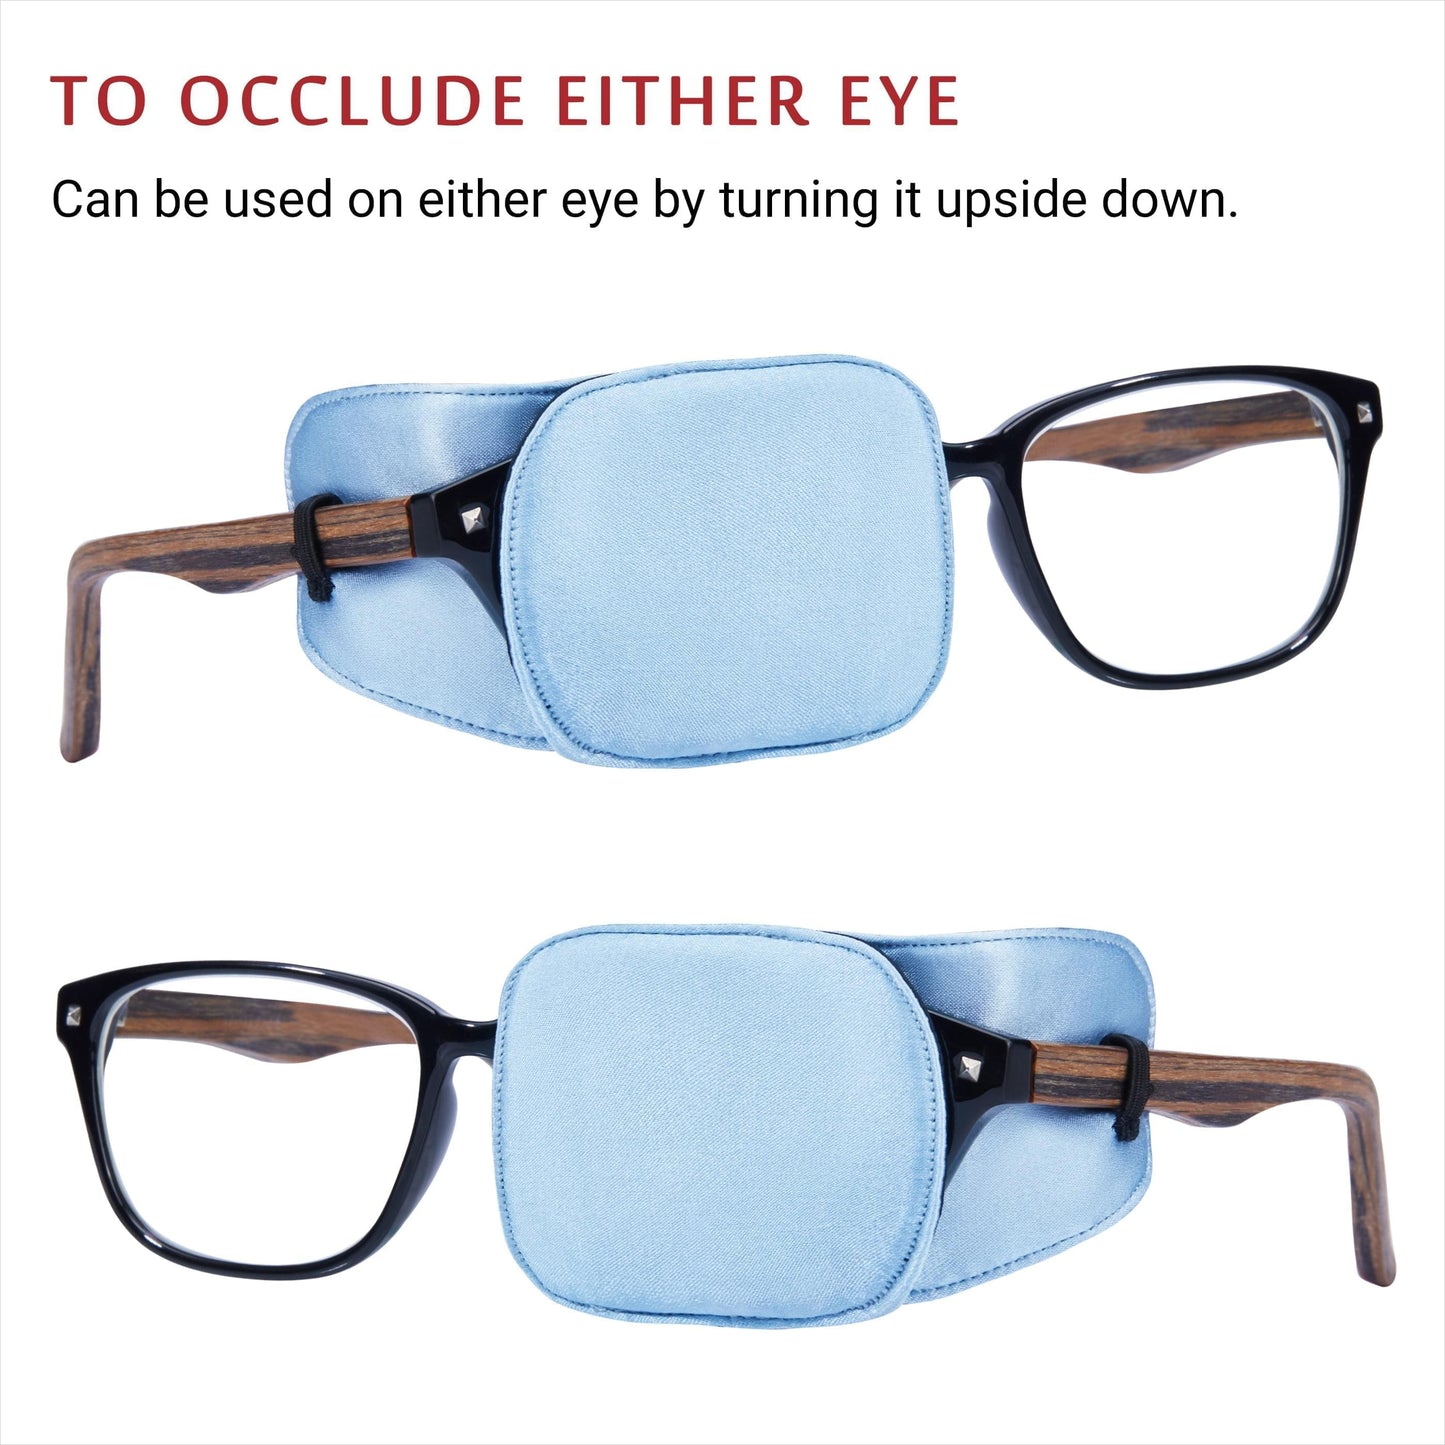 Astropic 2Pcs Silk Eye Patches for Glasses (Medium, Sky Blue)